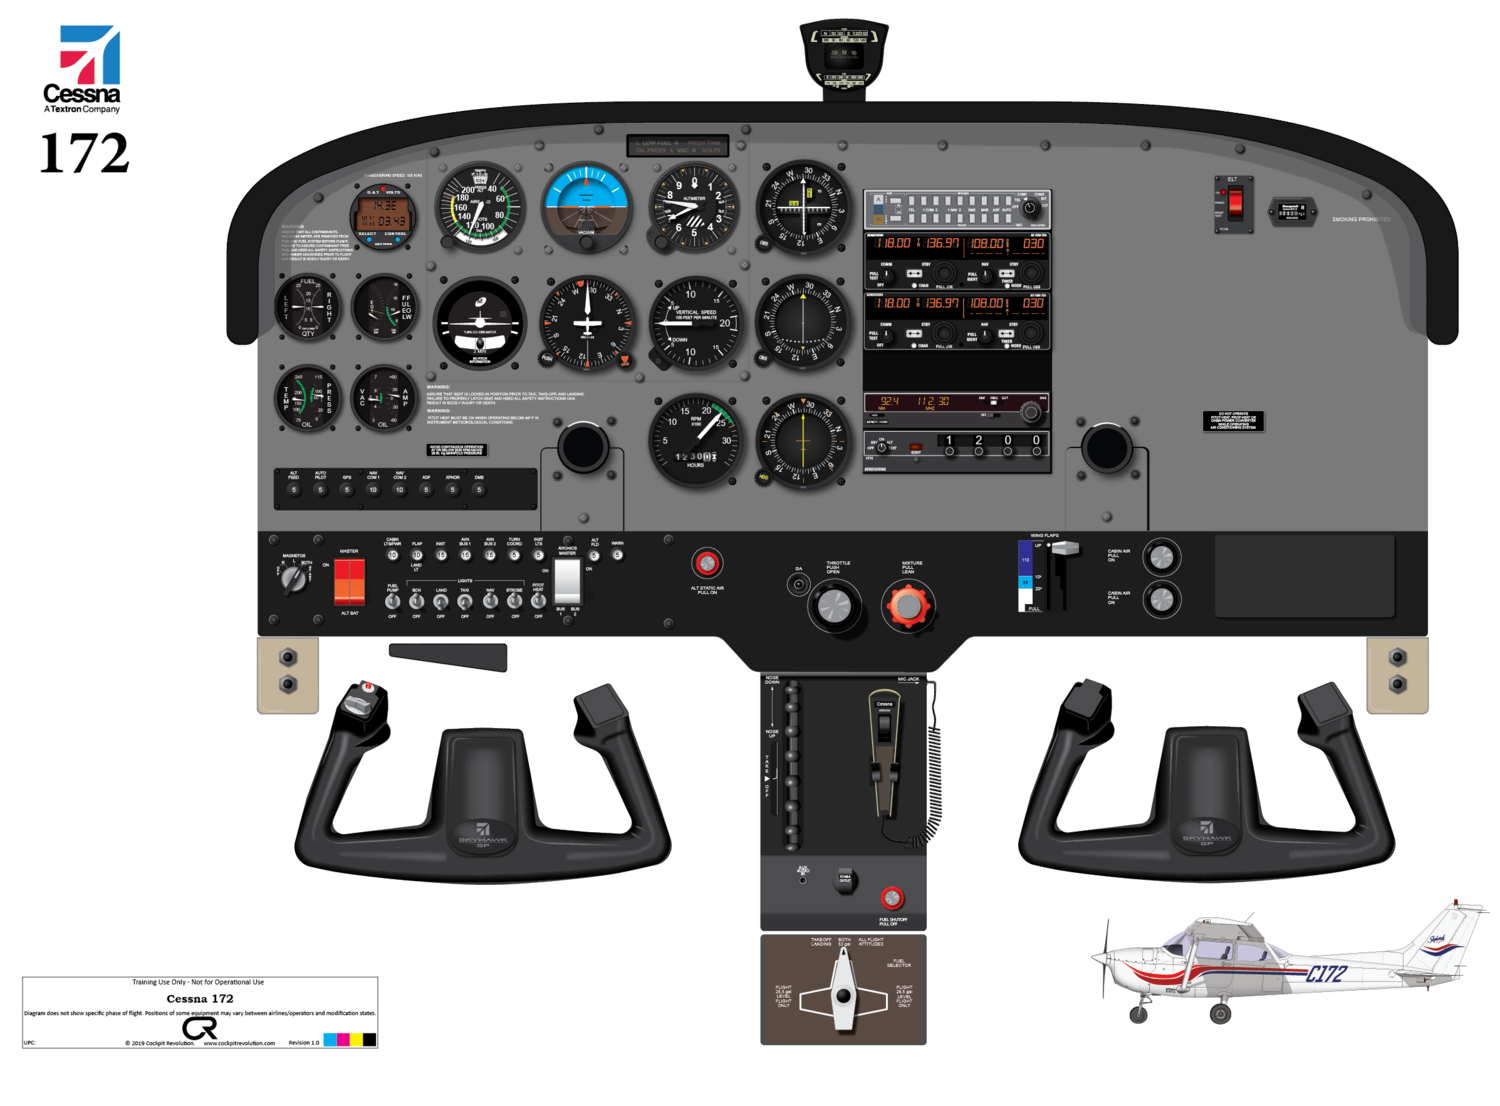 Cessna C172 with Conventional Instruments Cockpit Poster - Printed